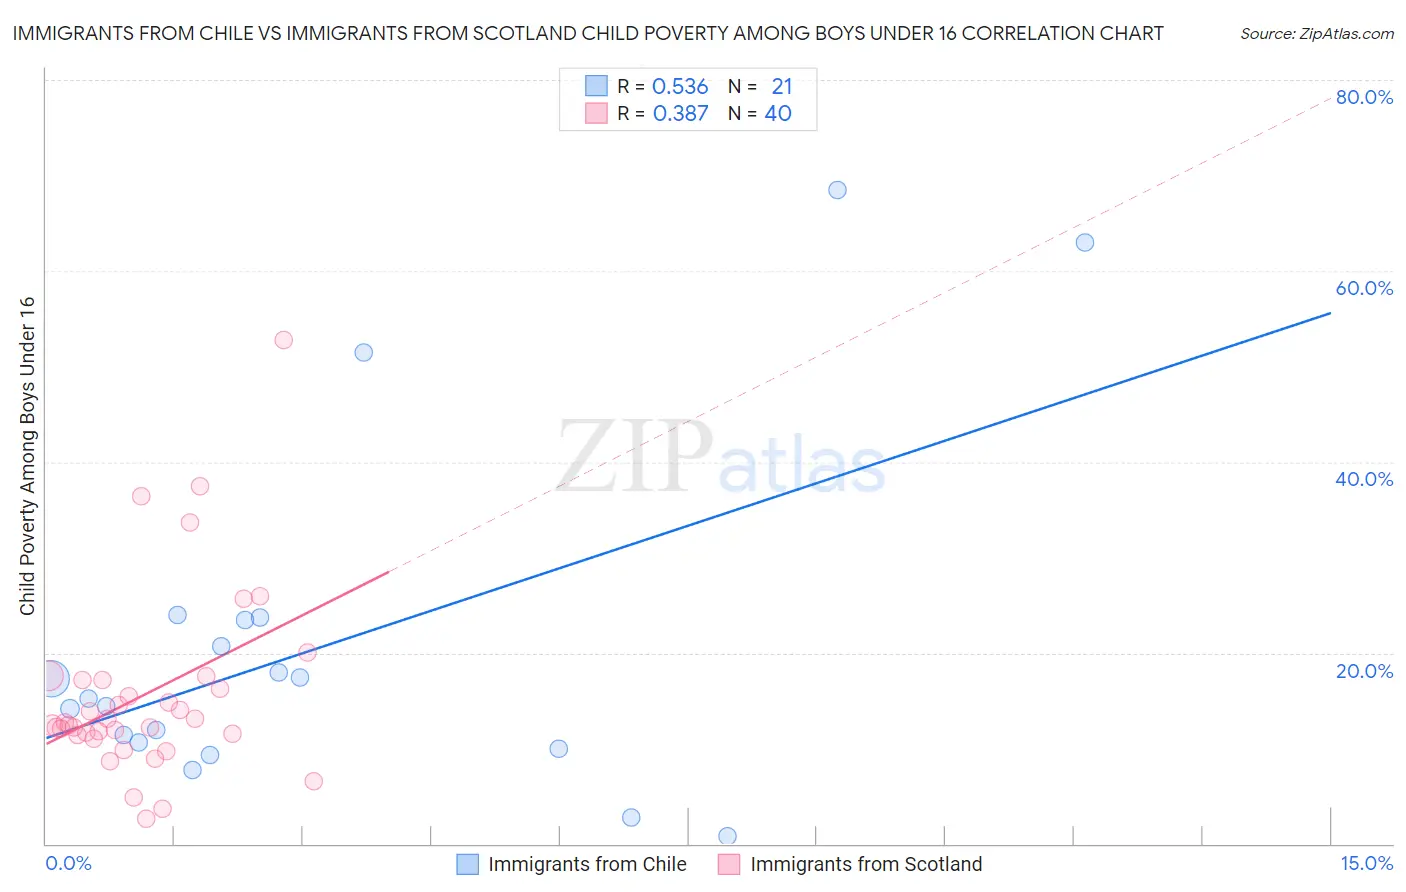 Immigrants from Chile vs Immigrants from Scotland Child Poverty Among Boys Under 16